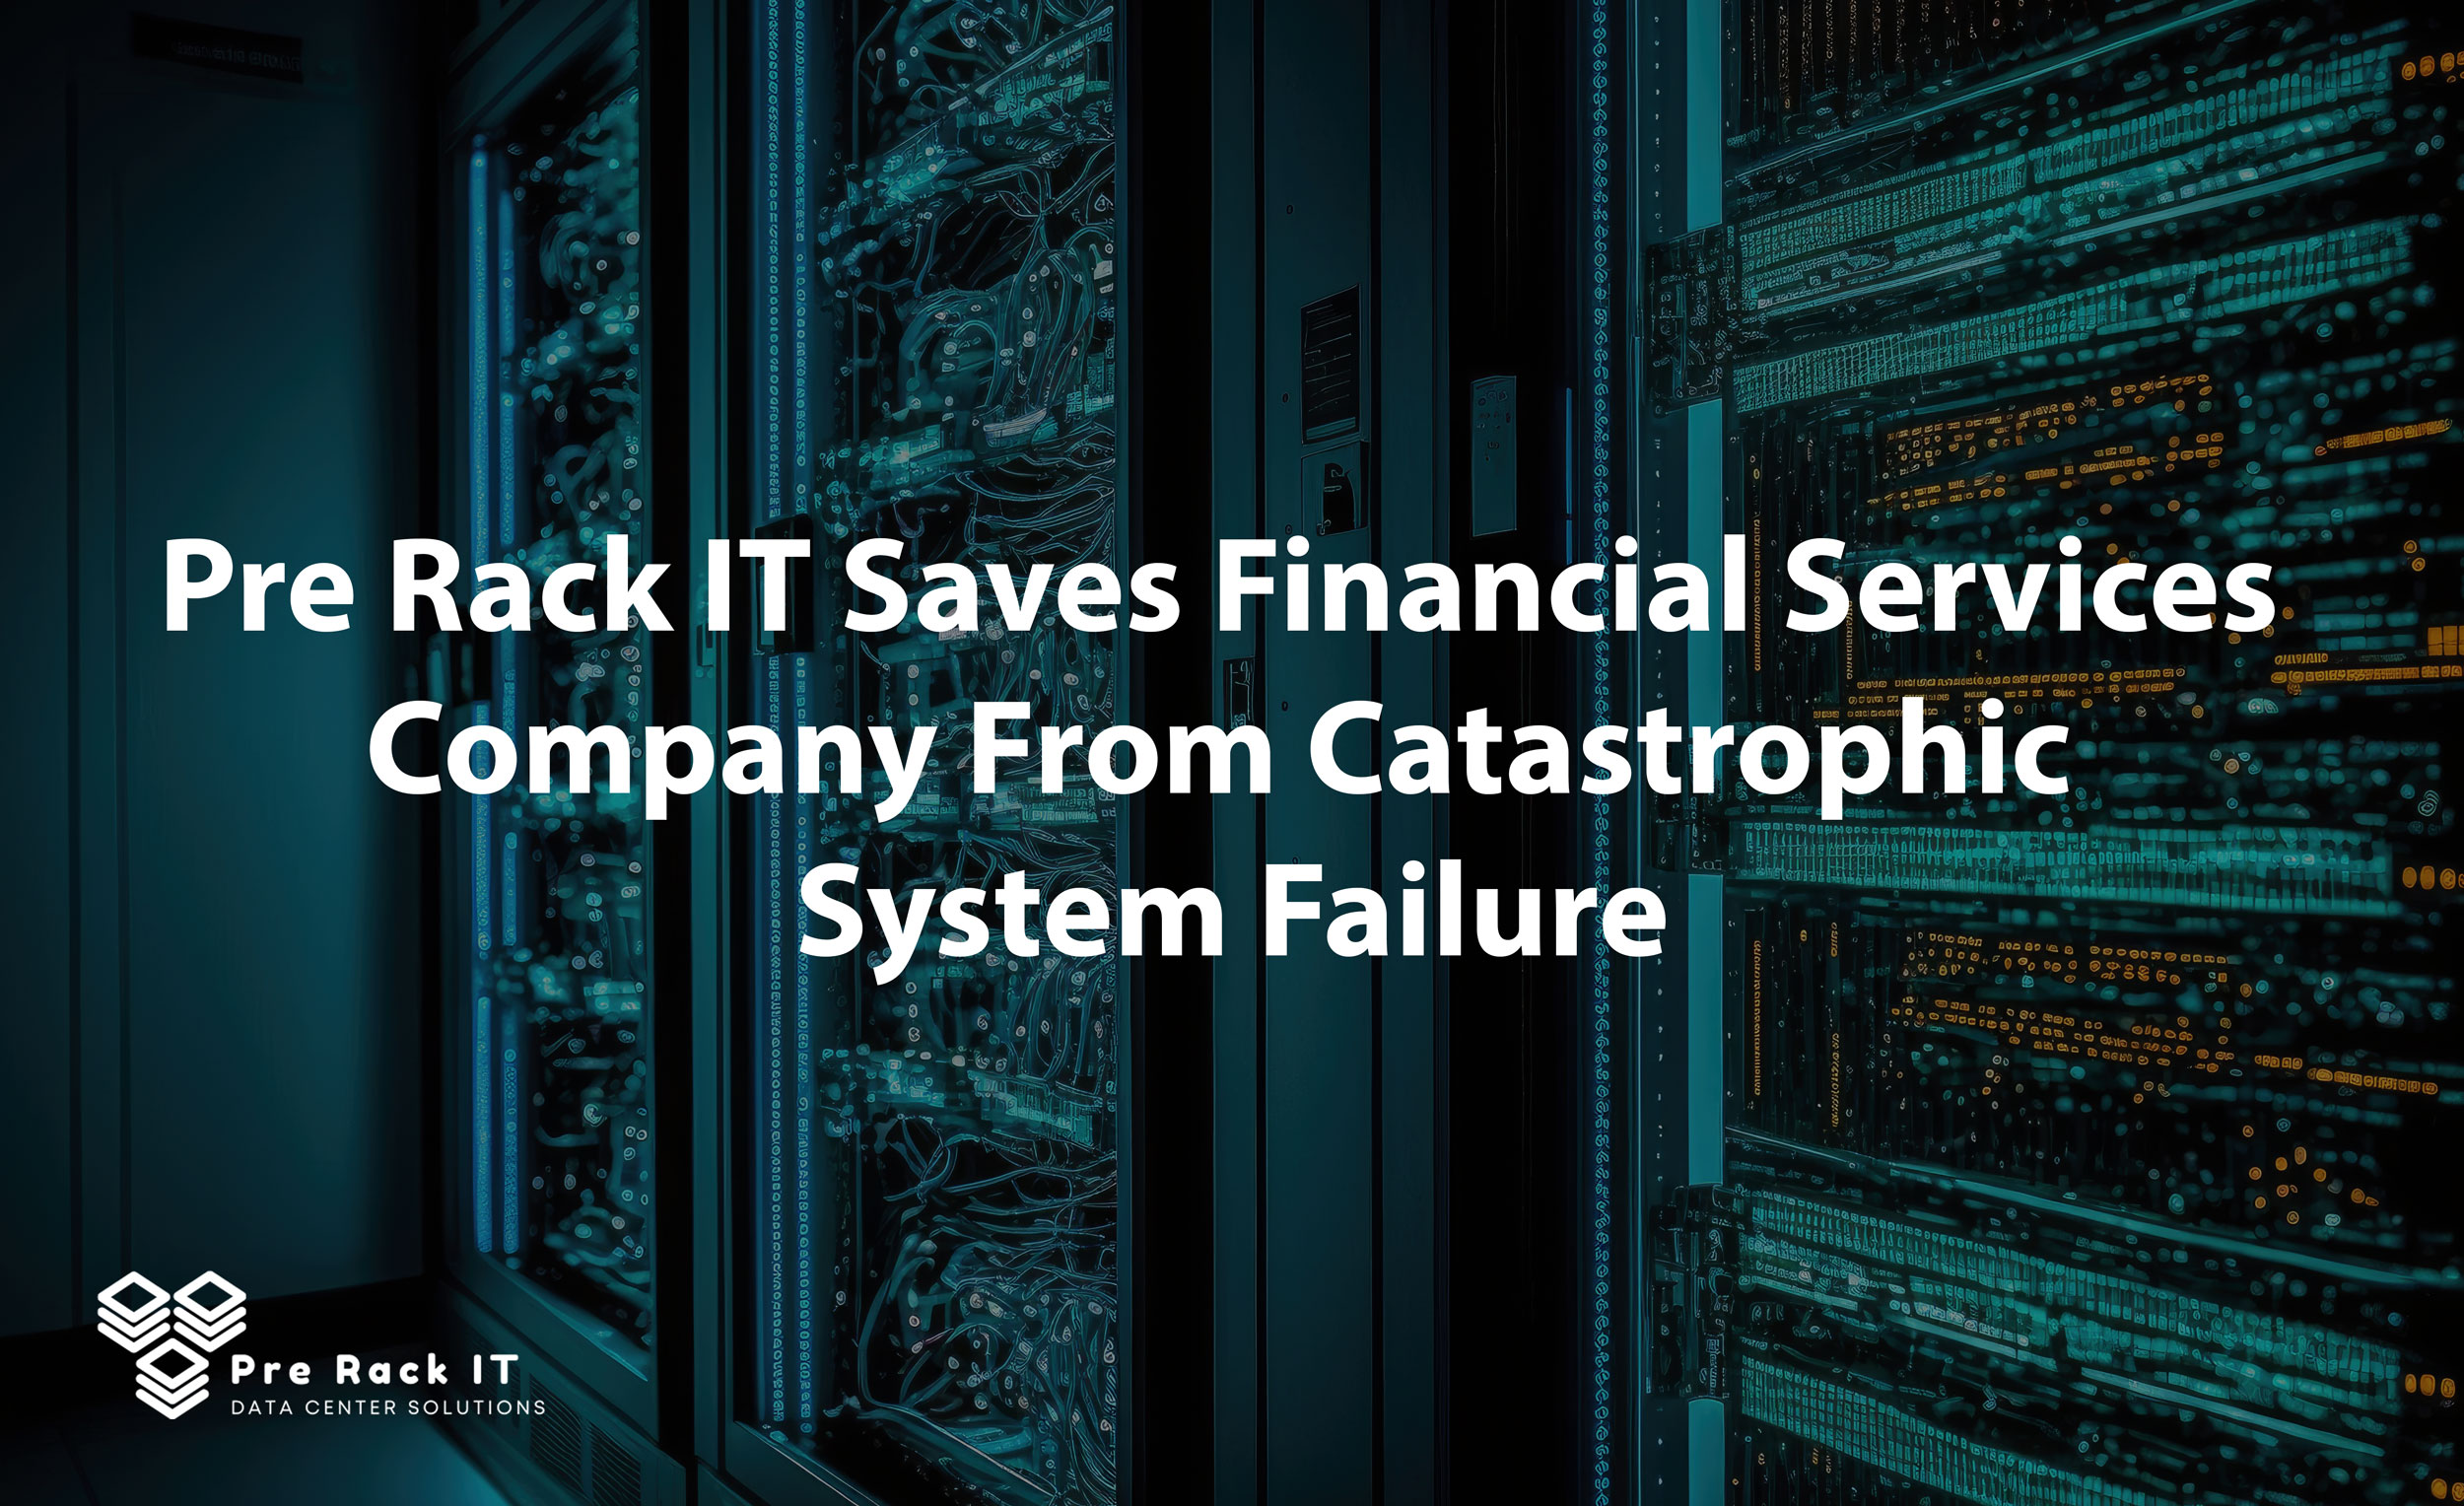 Pre Rack IT Case Study - Saves Financial Services Company from Catastrophic System Failure